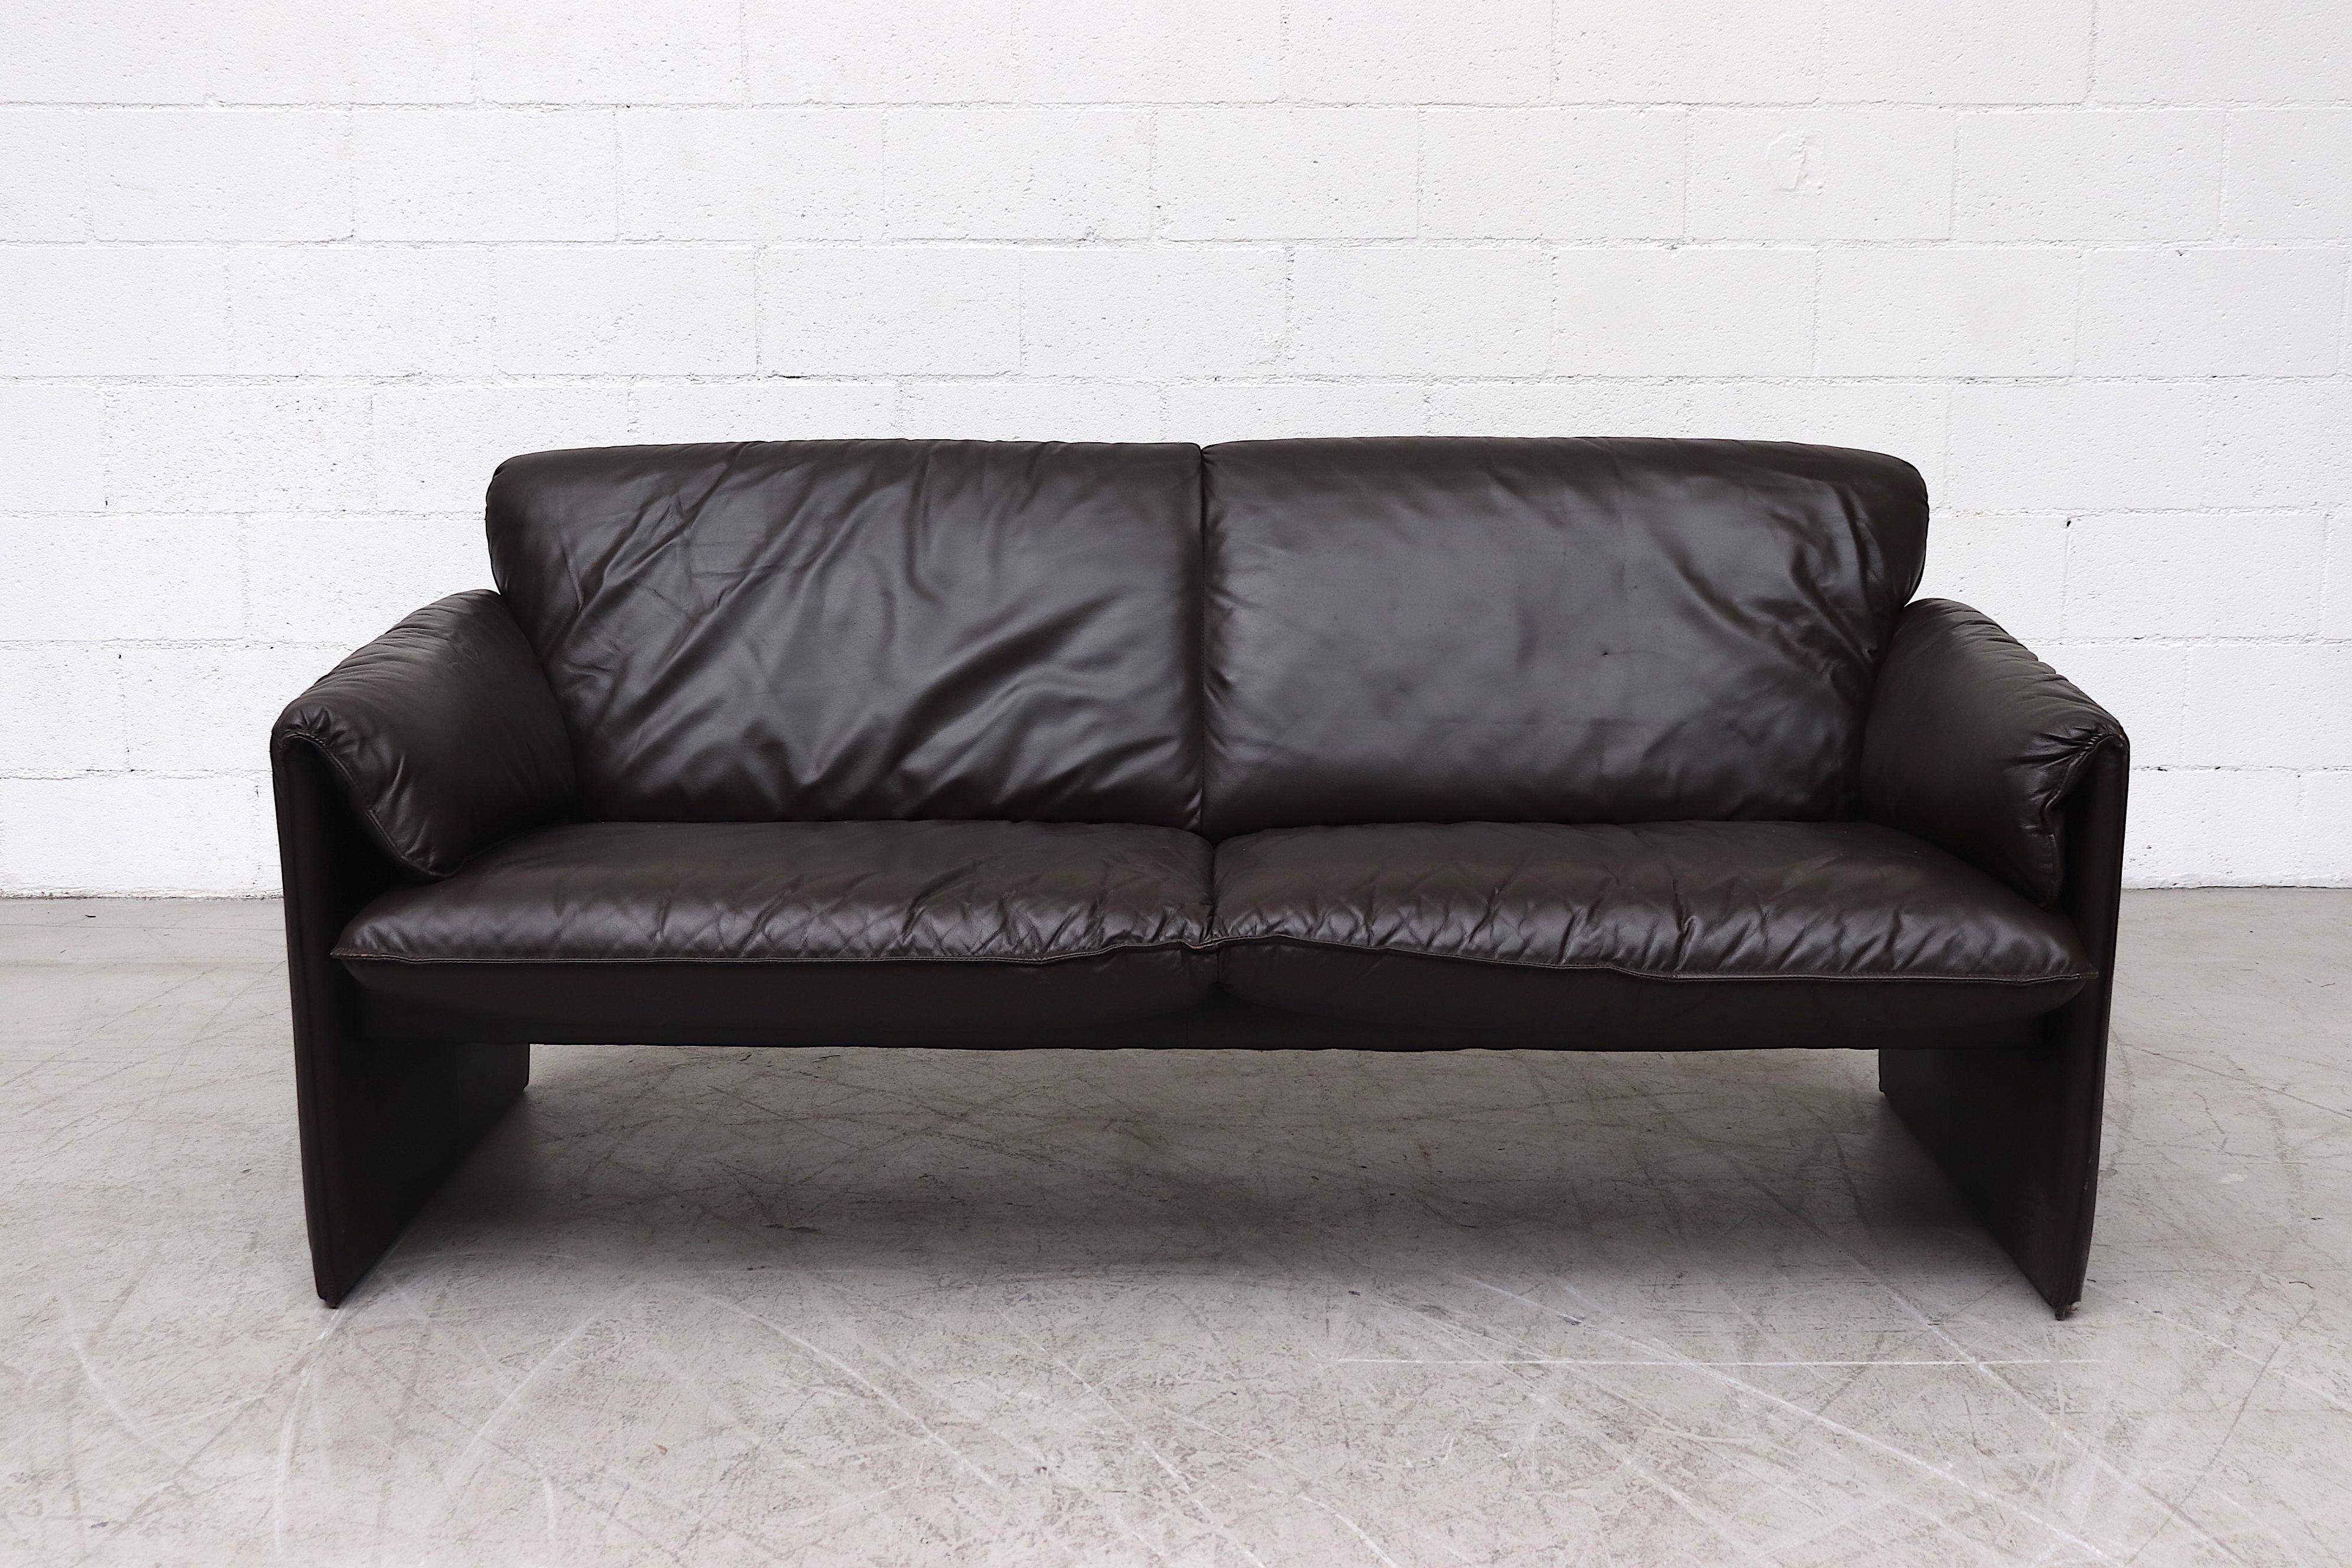 Dark Mocha leather 'Bora Bora' 2-seat sofa by Leolux. In original condition with manufacturer engraving and some visible wear and scratching.